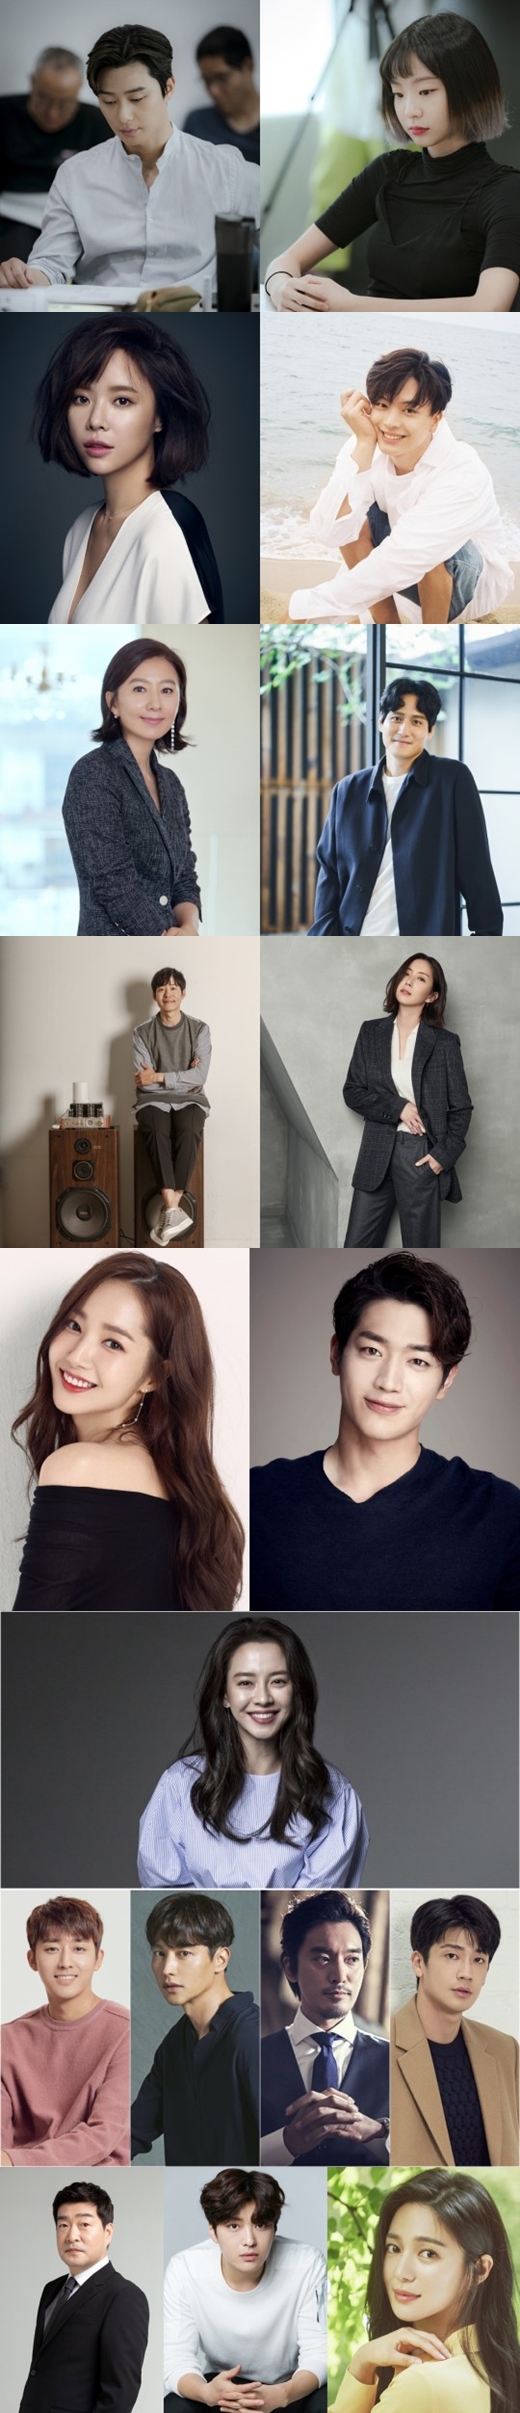 Drama lineup revealedJTBC will be in 2020 yearIt has unveiled a powerful Drama lineup that makes you look forward to.This year, JTBC, loved by various dramas that cross genres such as SKY Castle, Blind Eyes, Mellows constitution, and Eighteen Moments, introduced the first half of 2020s Drama lineup, which will attract viewers beyond 2019.First, Itaewon Klath and Foa, which are works that dramatize the webtoon of the topic, give more lively fun than the original.Itaewon Klath is a work that depicts the hip rebellion of youths who are united in an unreasonable world, stubbornness and popularity.Actor Park Seo-joon plays Park Sae-roi, an outspoken straight-line young man who has been accepting Itaewon shopping malls with one conviction, and Kim Dae-mi plays the role of High Intelligence Socio Pass Joyser, which is equipped with Gods brain.Based on a 10-point webtoon, Foa is a fantasy healing drama that releases the filthy aunt of a mysterious stall and a pure young Albany who enter the dream of the guests.Hwang Jeong-eum, who returned to the house theater after two years, will play the role of Aunt Foa and the actor Yoo Sung-jae, who chose Two-Gap as his next film after Drama Goblin, will take the role of Han Gang-bae, an employee of Gap Eul Mart, raising expectations.JTBC, which proved to be a mystery melo restaurant through Misty and Dignity,In the first half of the year, he will show two passionate mystery melodies.The world of couples, which will be broadcast in April next year, will be the vengeance of revenge that unfolds as the couples kite, which they believed was love, is cut off by betrayal.Kim Hee-ae, who returns to Drama in four years, and Mo Wan-il, who showed a detailed storyline and colorful visual beauty with Misty, are considered to be the most anticipated works in the first half of the year.Elegant Friends is a collection of middle-aged men and their friends (a) puberty, featuring episodes that take place in the wake of a murder in a new city where couples in their 40s live together.The actors Yoo Jun-sang (played by Ahn Gung-cheol) and Song Yoon-ah (played by Nam Jeong-hae) who believe and see each other are in harmony with each other.There is also a sweet romance that will raise the audiences love index.The upcoming February broadcast, Ill Go If the Weather Is Good, is a heartwarming healing romance delivered by actors Park Min-young (played by Mok Hae-won) and Seo Gang-joon (played by Lim Eun-seop).Haewon, who is tired of living in Seoul and goes down to Bukhyeon-ri, will meet with Eun-seop, a high school alumni who runs an independent bookstore, and will warmly dissolve the hearts of viewers at the end of winter with a healing and loving story.Song Ji-hyo, Son ho joon, Song Jong-ho, Kim Min-joon, and Sanam (4) Cho of Gujaseong are reboot romances, We Did Love You? is a heart-warming work with just the lineup.In front of the 14th year of the solo workshop single mother, Noh Ae-jeong (Song Ji-hyo), four unique men, Oh Dae-oh (Son ho joon), Ryu Jin (Song Jong-ho), Kim Min-joon, and Oh Yeon-woo (Ku Ja-seong), appear and unfold the fantasy-like five-legged romance.An official from JTBC Drama Bureau said, 2020 yearI will do my best to make a drama that viewers can trust and support. 